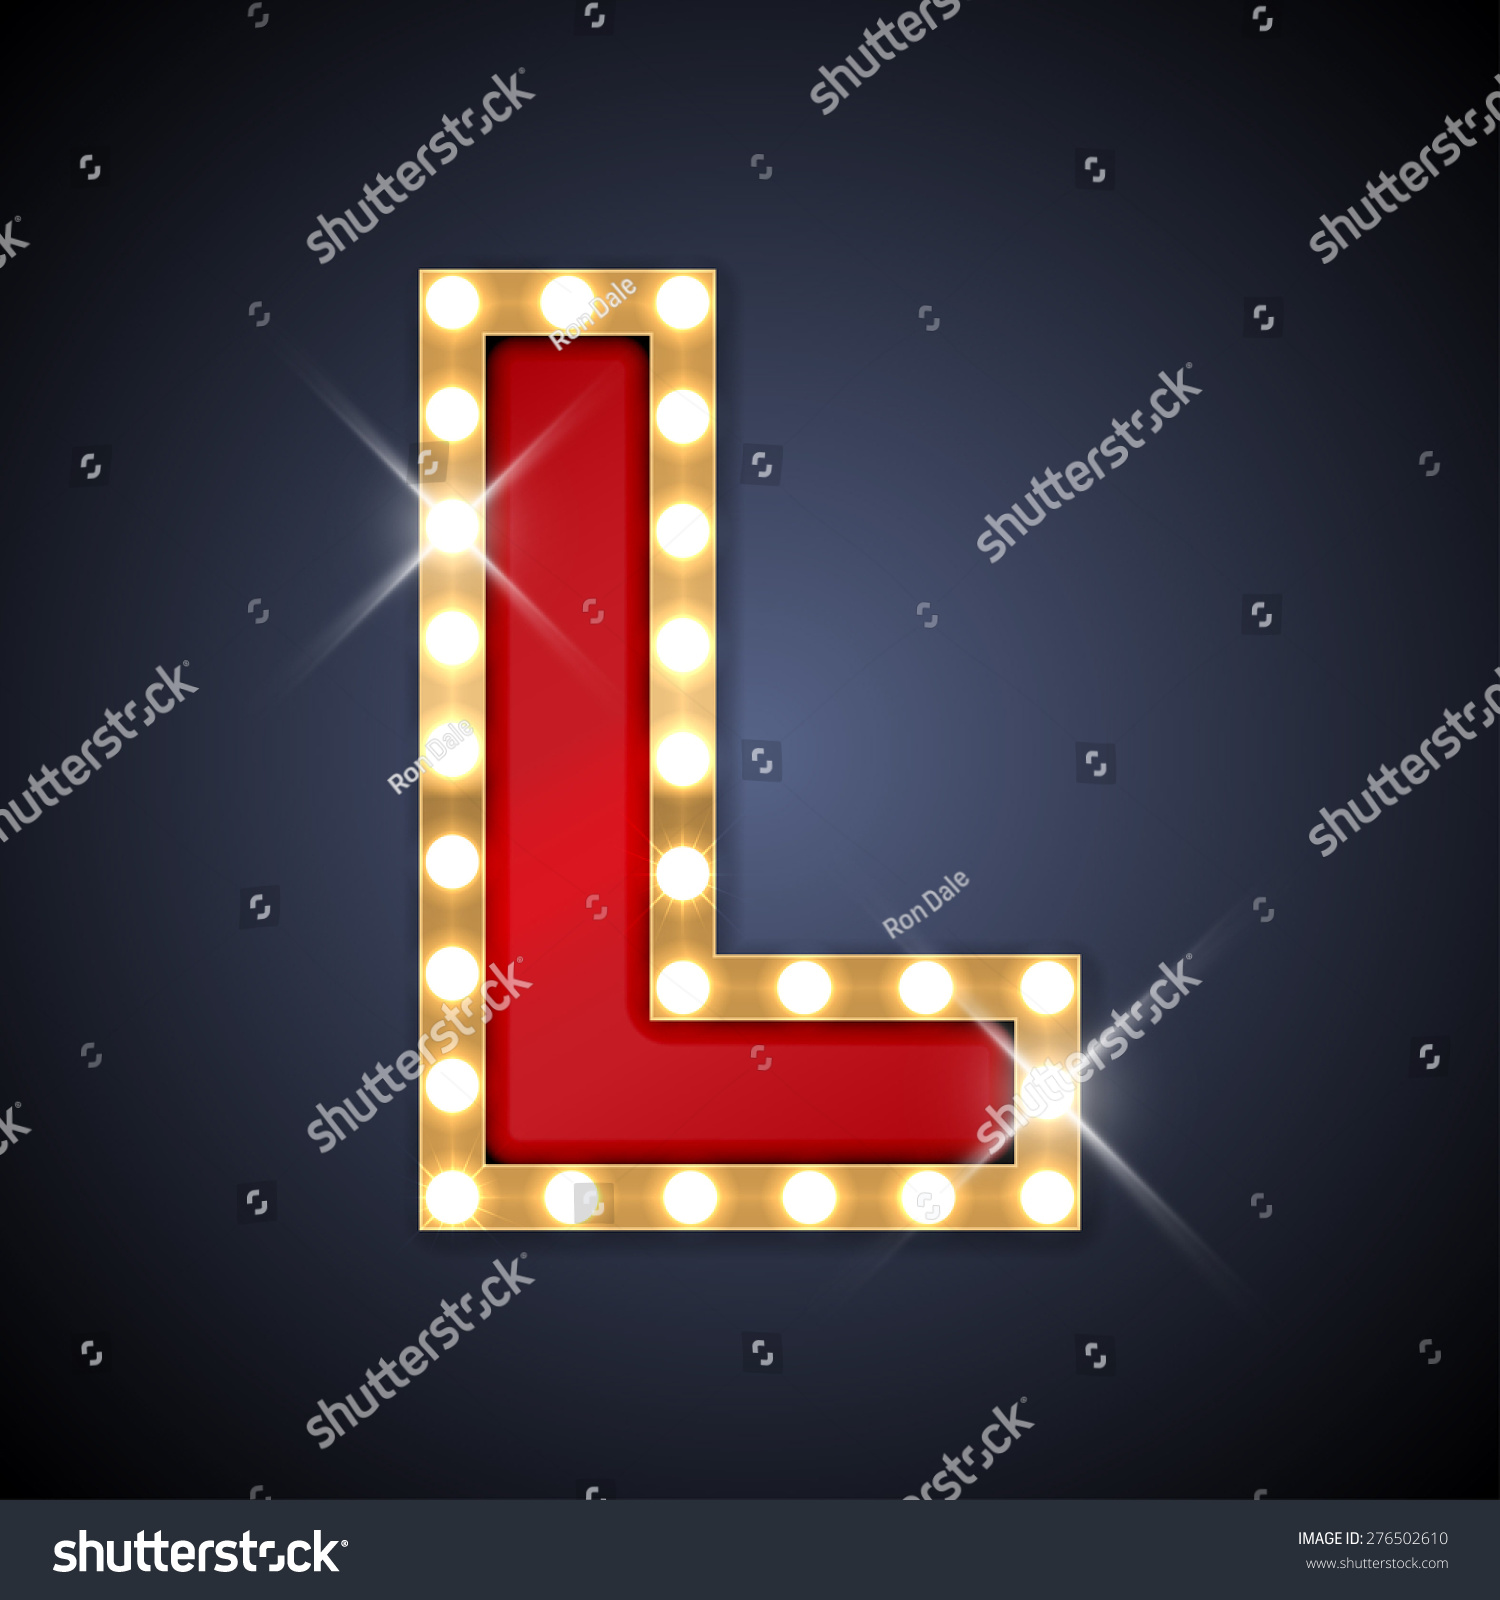 Vector Illustration Of Realistic Retro Signboard Letter L. Part Of ...